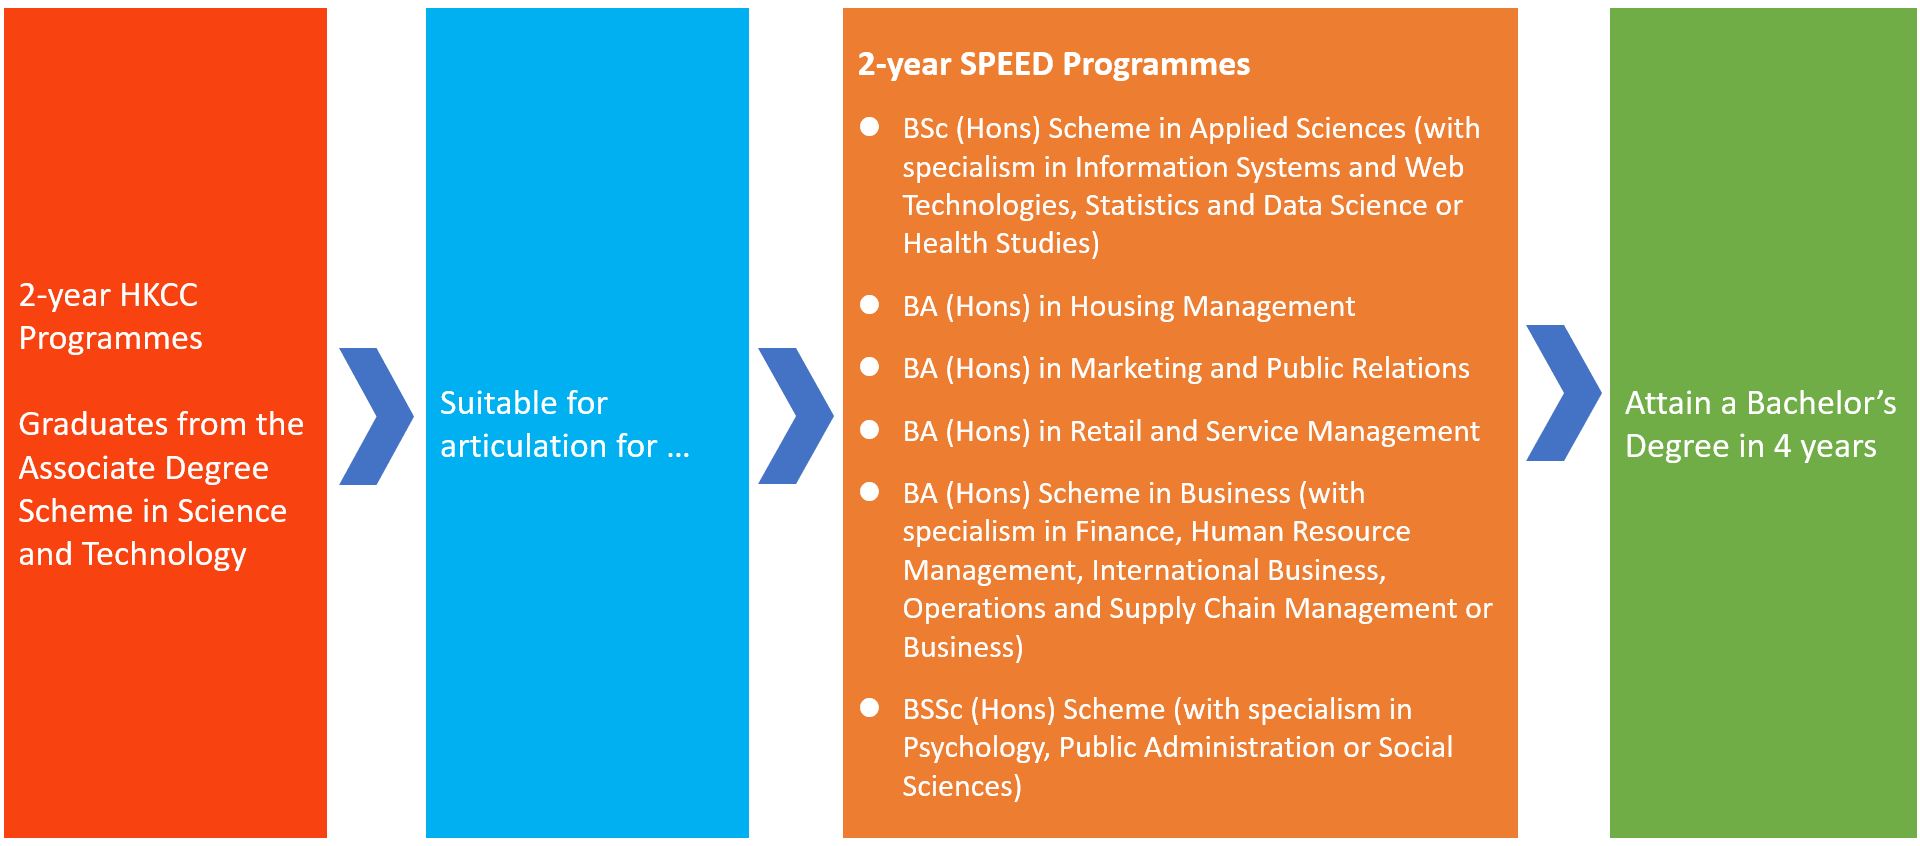 Graduates from the Associate Degree Scheme in Science and Technology are suitable for articulation for a list of 2-year SPEED Programmes – including BSc (Hons) Scheme in Applied Sciences (with specialism in Information Systems and Web Technologies, Statistics and Data Science or Health Studies), BA (Hons) in Housing Management, BA (Hons) in Marketing and Public Relations, BA (Hons) in Retail and Service Management, BA (Hons) Scheme in Business (with specialism in Finance, Human Resource Management, International Business, Operations and Supply Chain Management or Business), and BSSc (Hons) Scheme (with specialism in Psychology, Public Administration or Social Sciences).